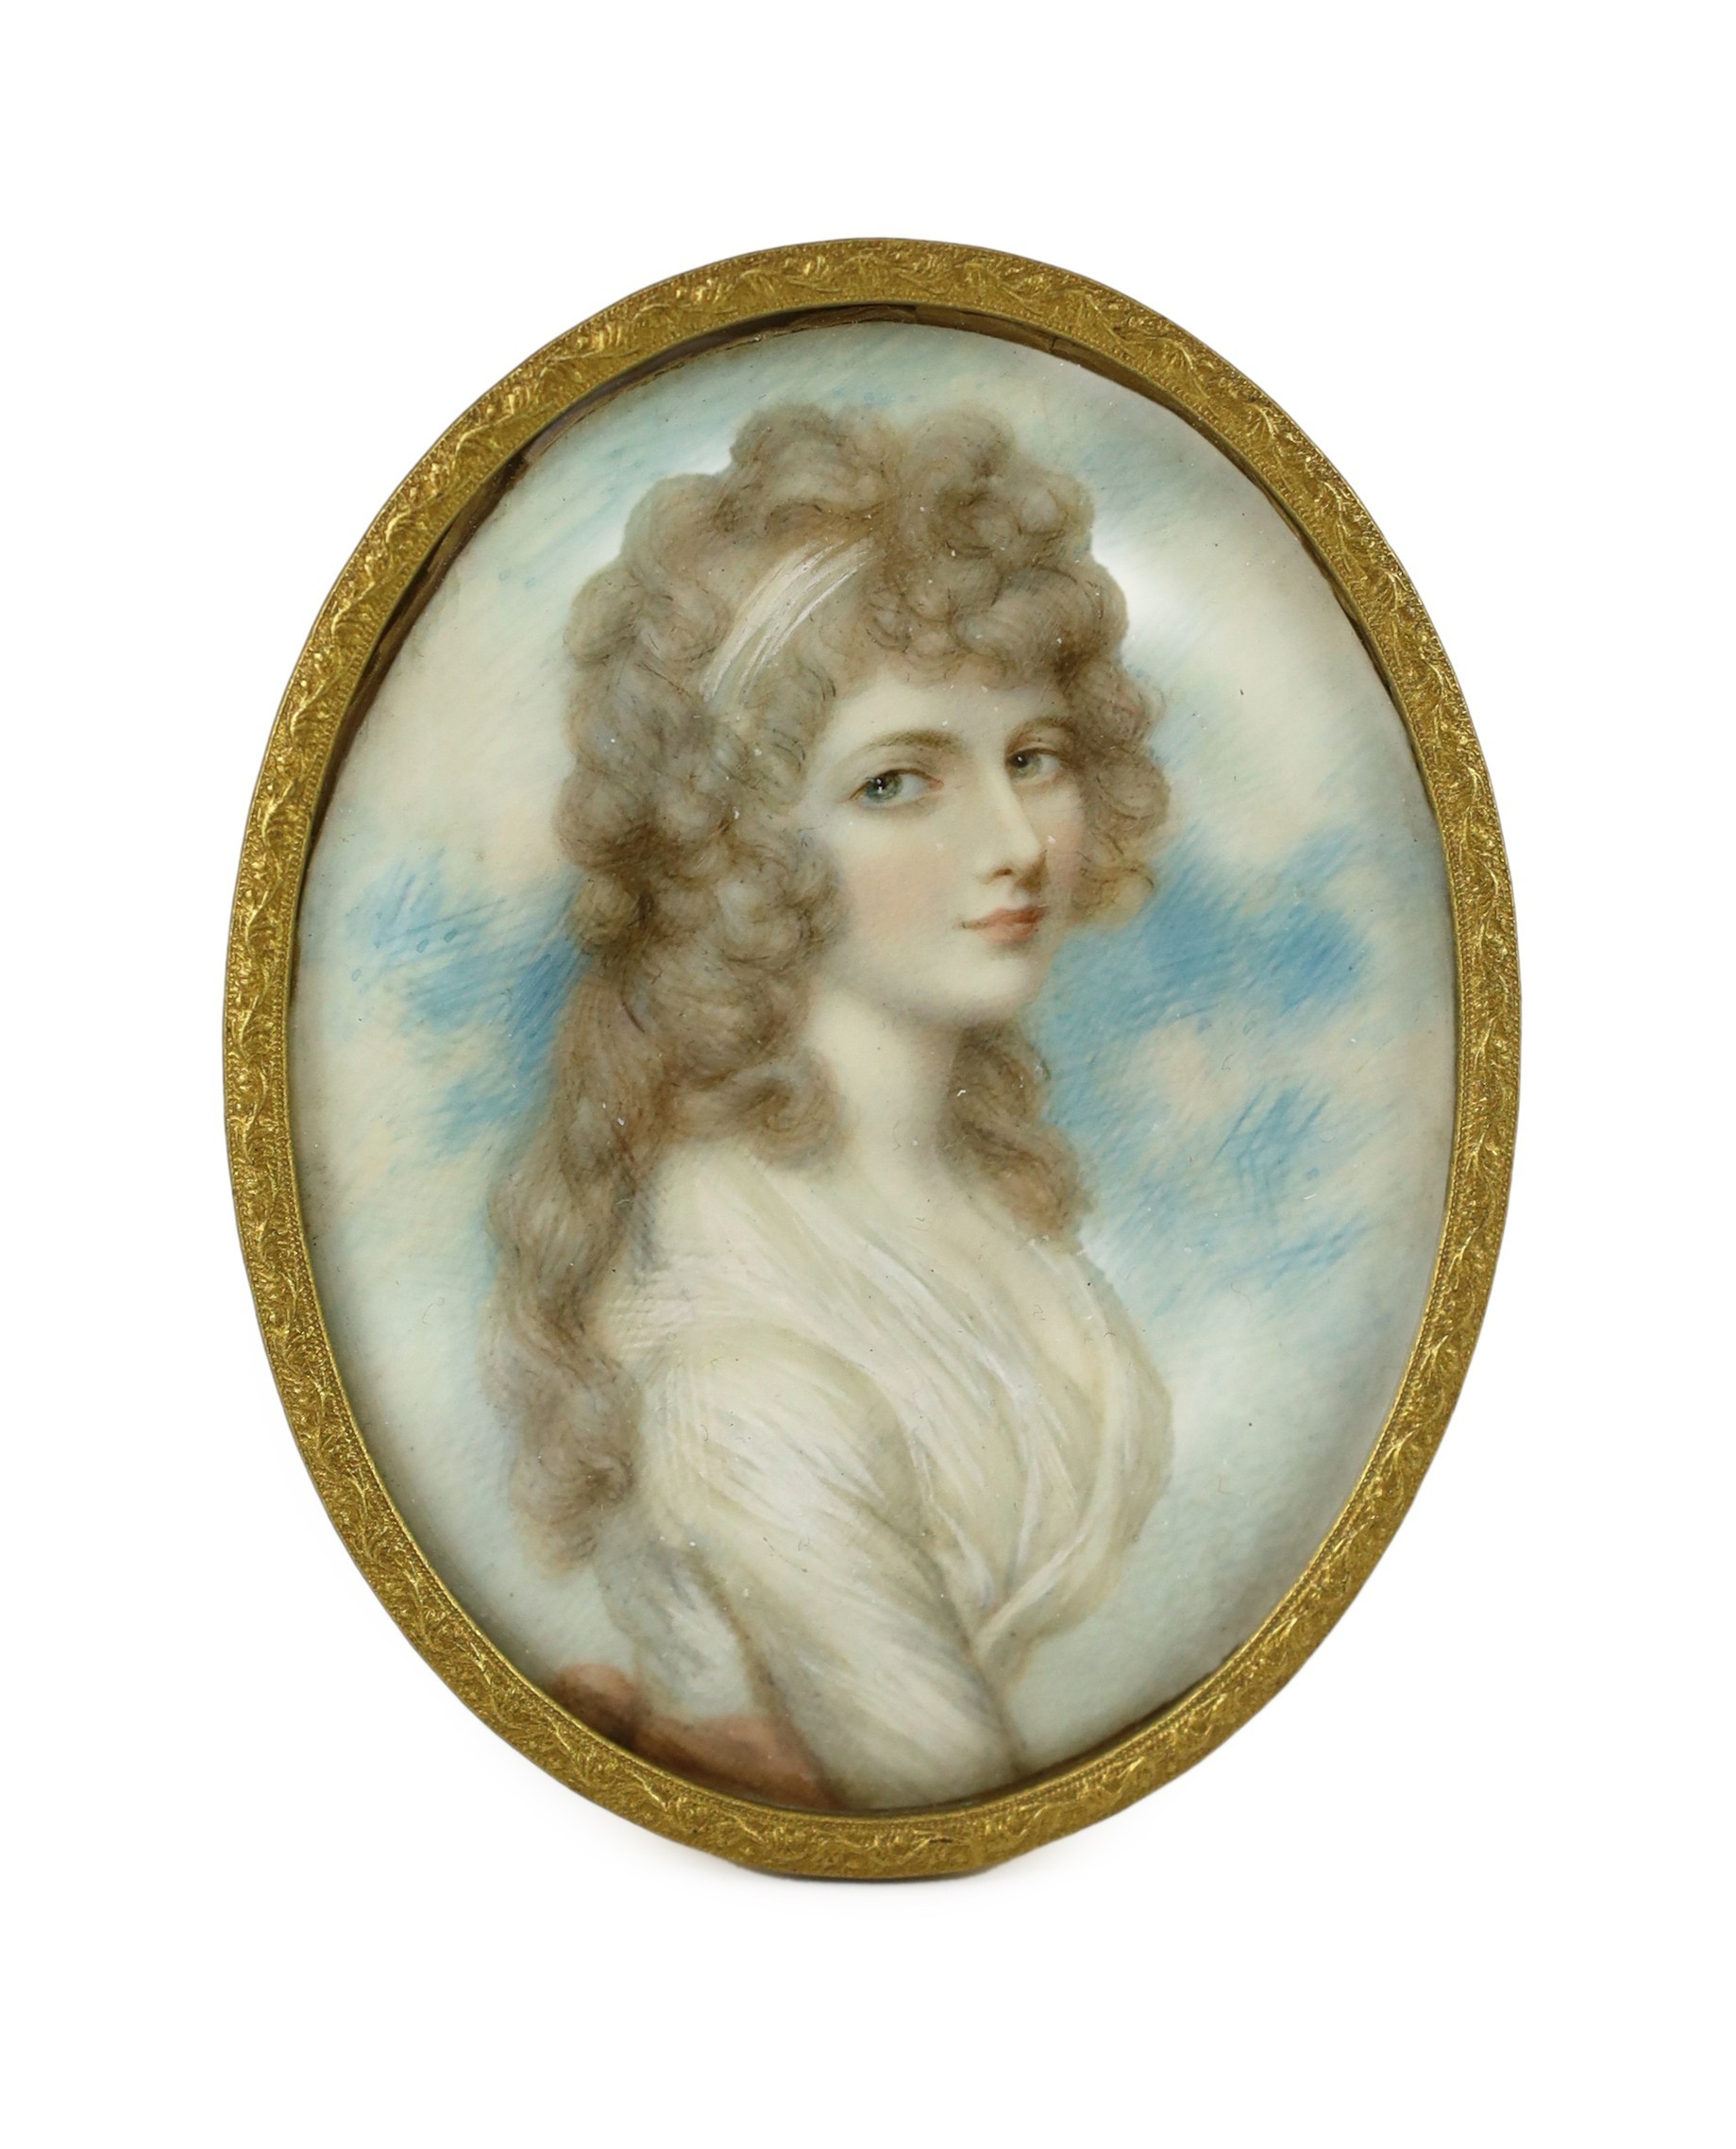 Attributed to Andrew Plimer (1763-1837), Miniature portrait of the Countess of Clare, watercolour on ivory, 8.5 x 6.75cm